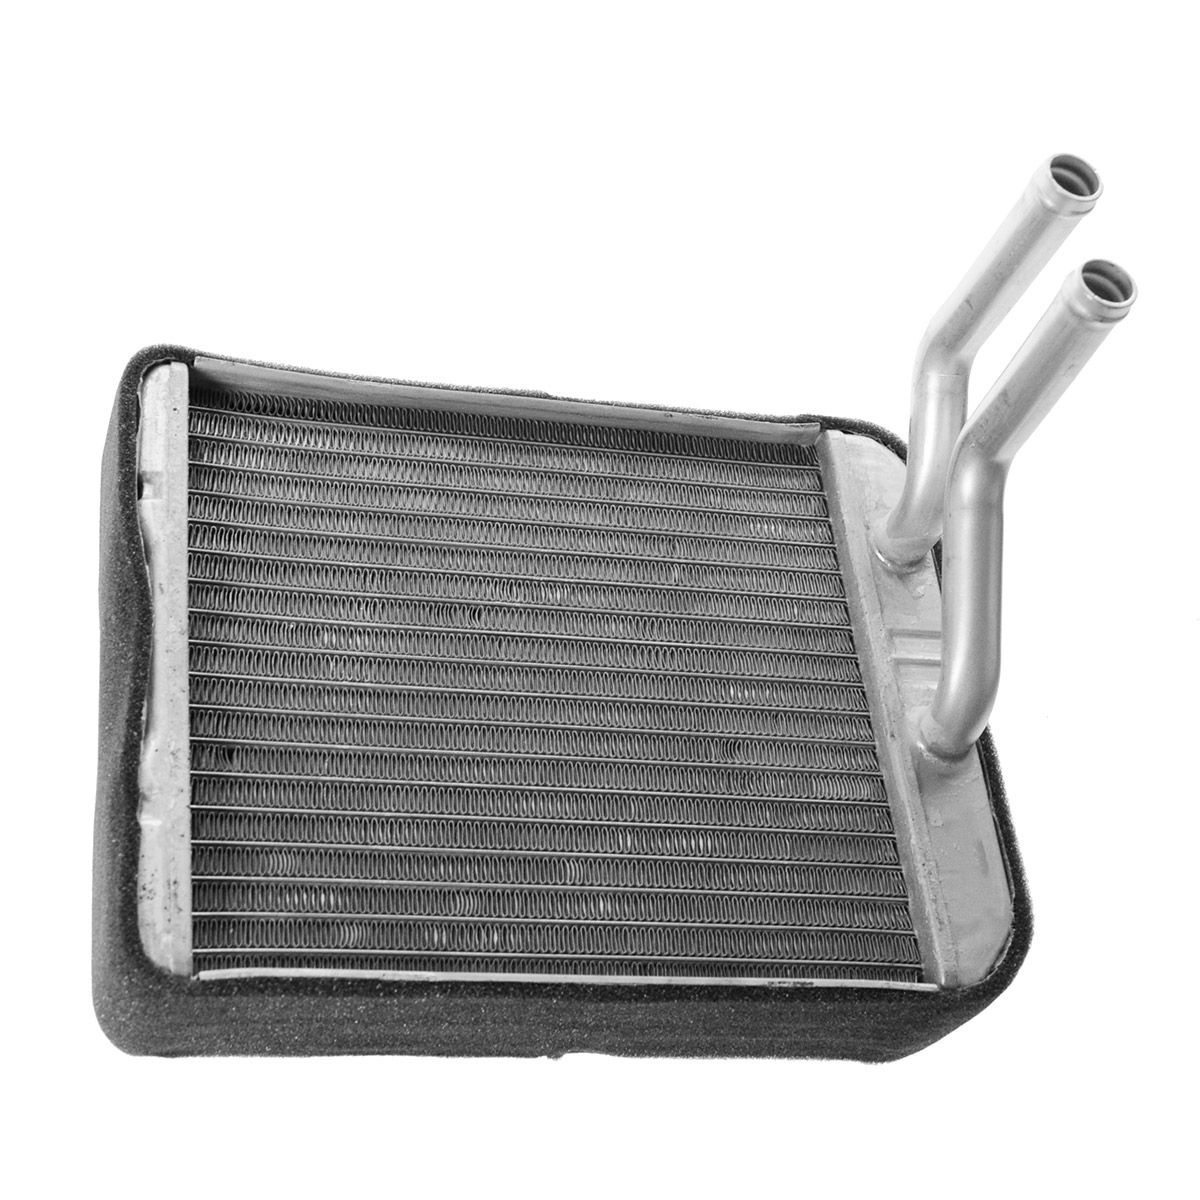 1955 Ford truck heater core #4